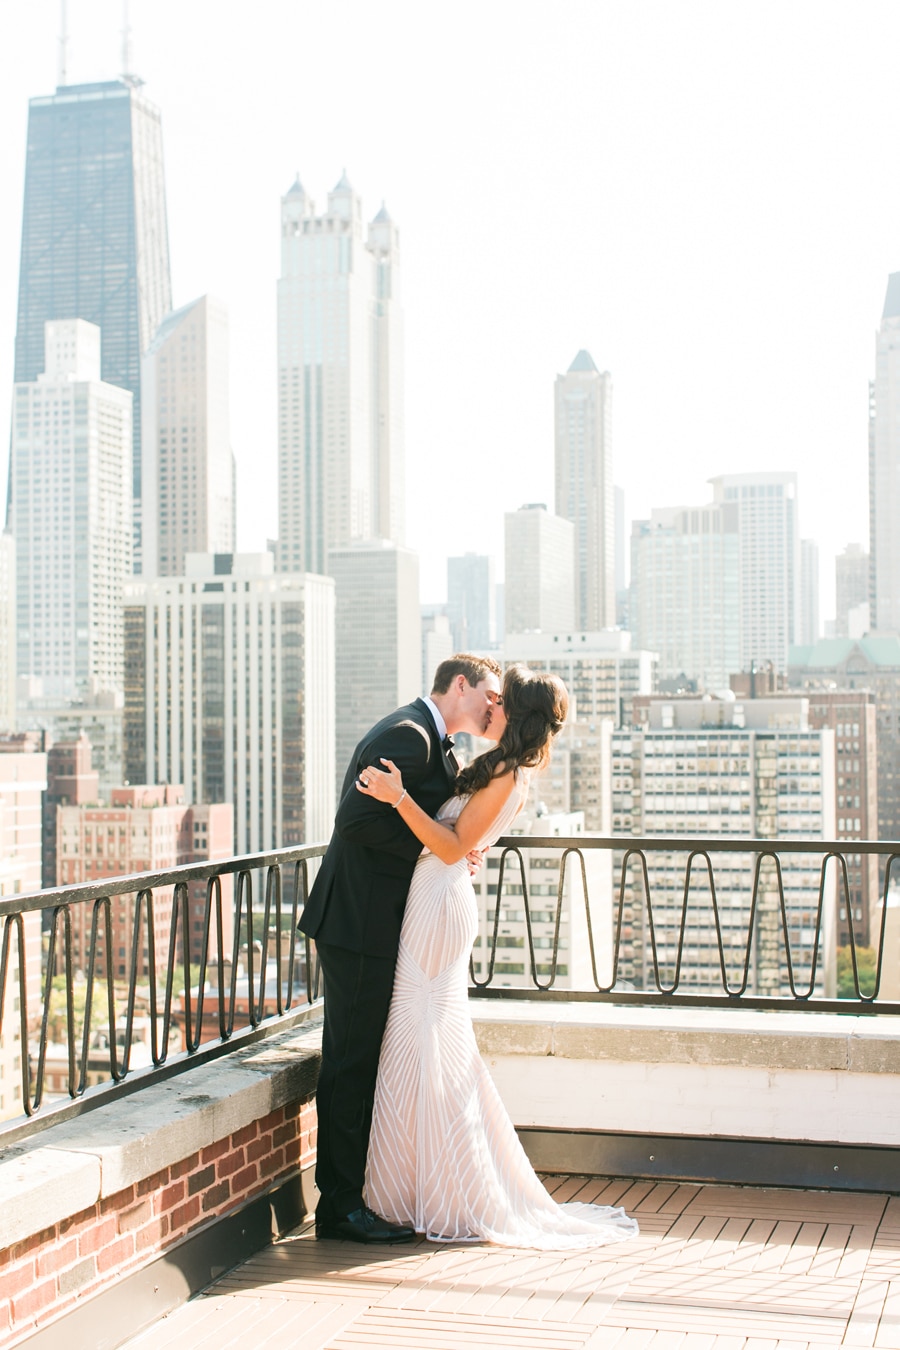 A stunning wedding first look moment on the rooftop of the Ambassador Hotel in Chicago.